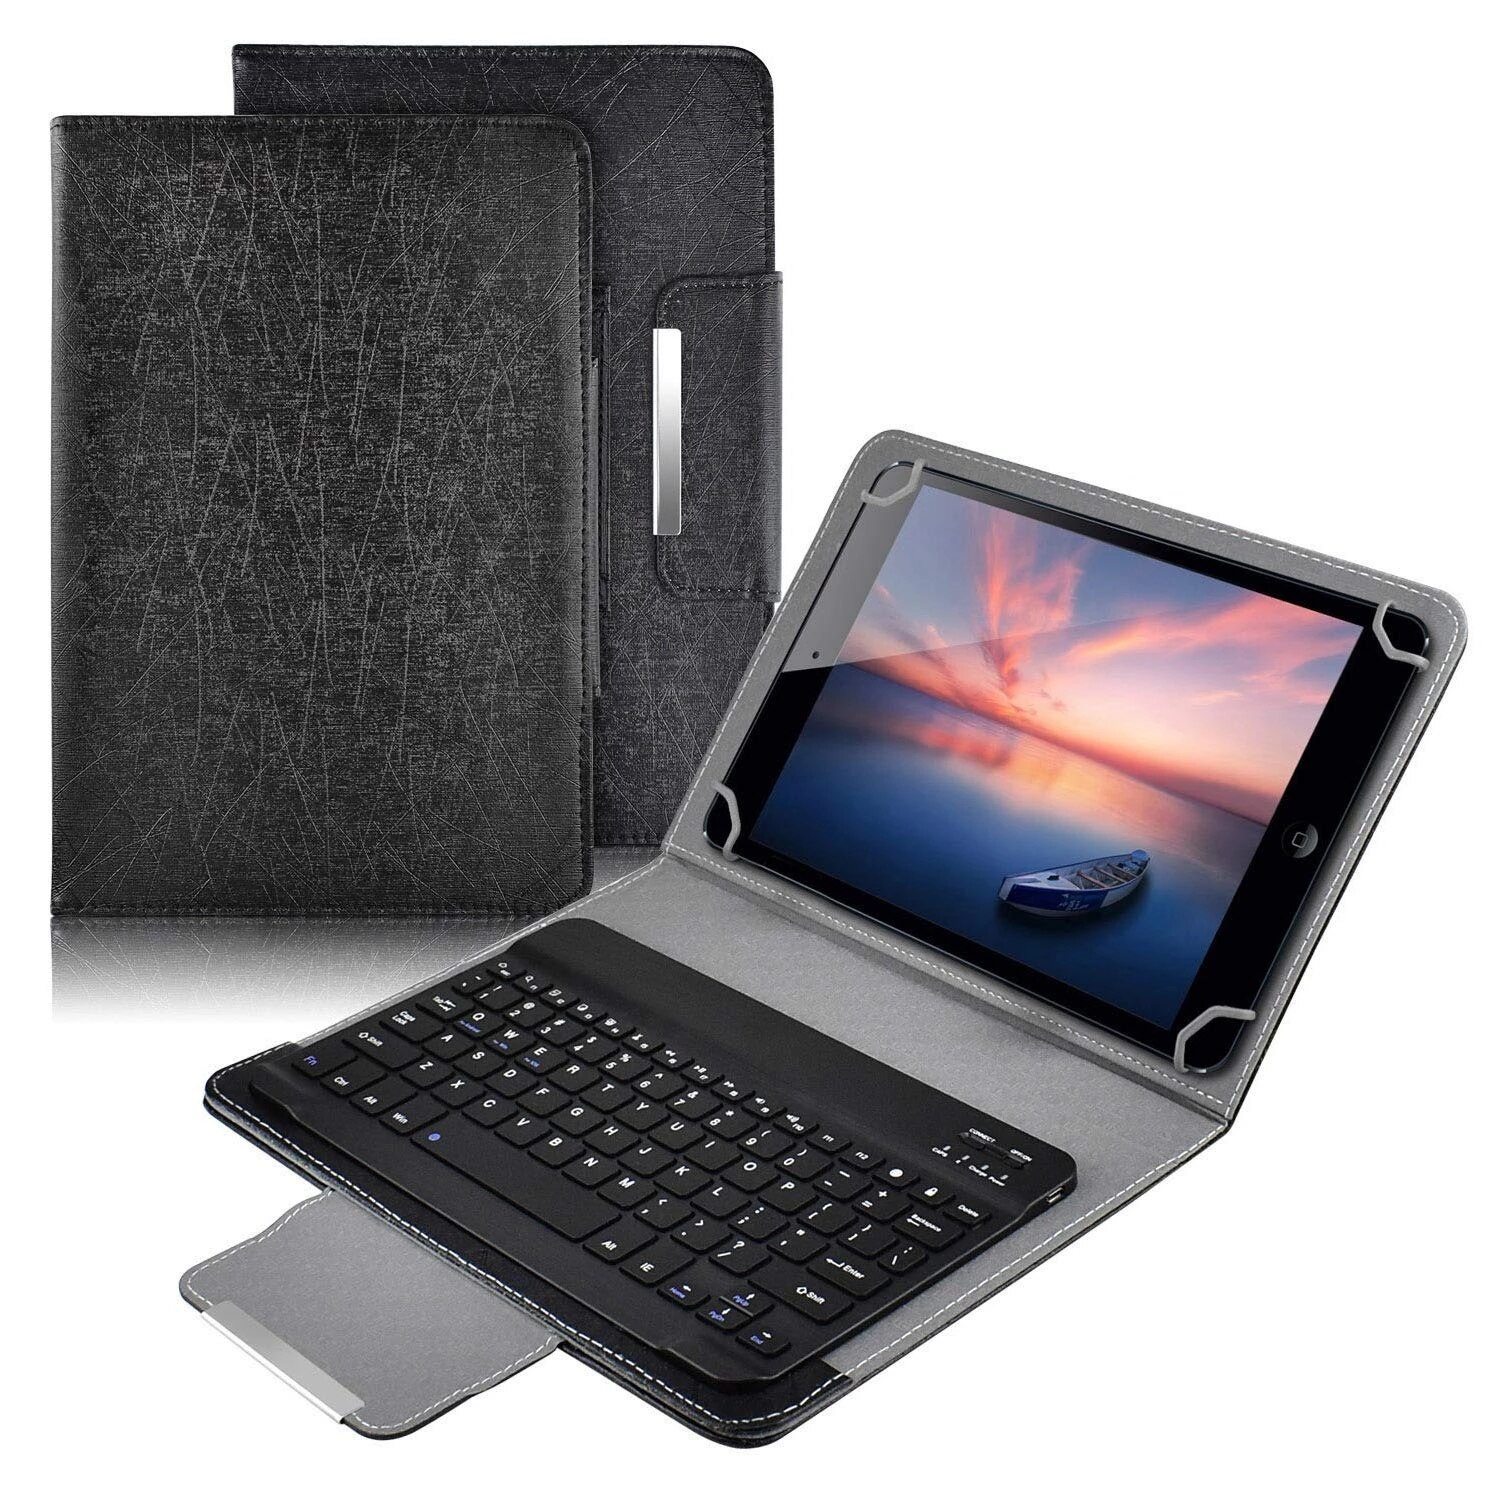 Draadloze Bluetooth Toetsenbord Voor Tablet Pu Leather Case Stand Cover Voor Pad 7 8 Inch 9 10 Inch Voor Ios android Windows